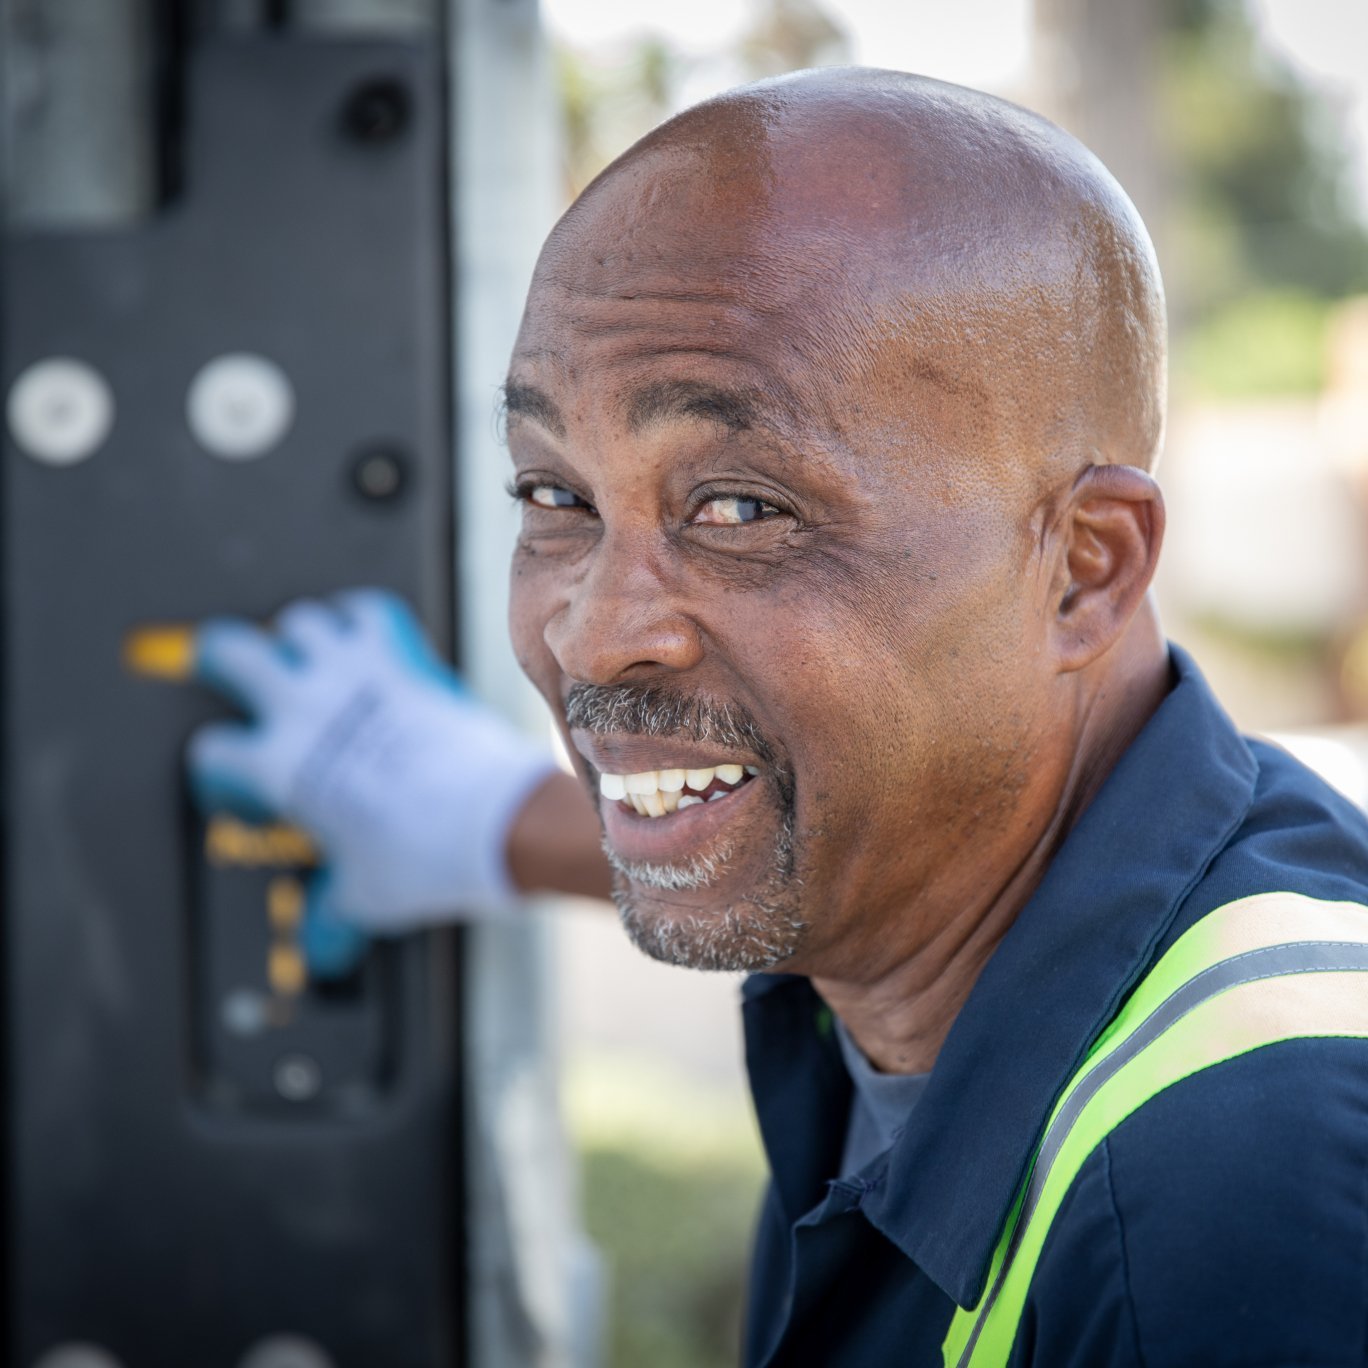 Man smiling while touching buttons of a truck